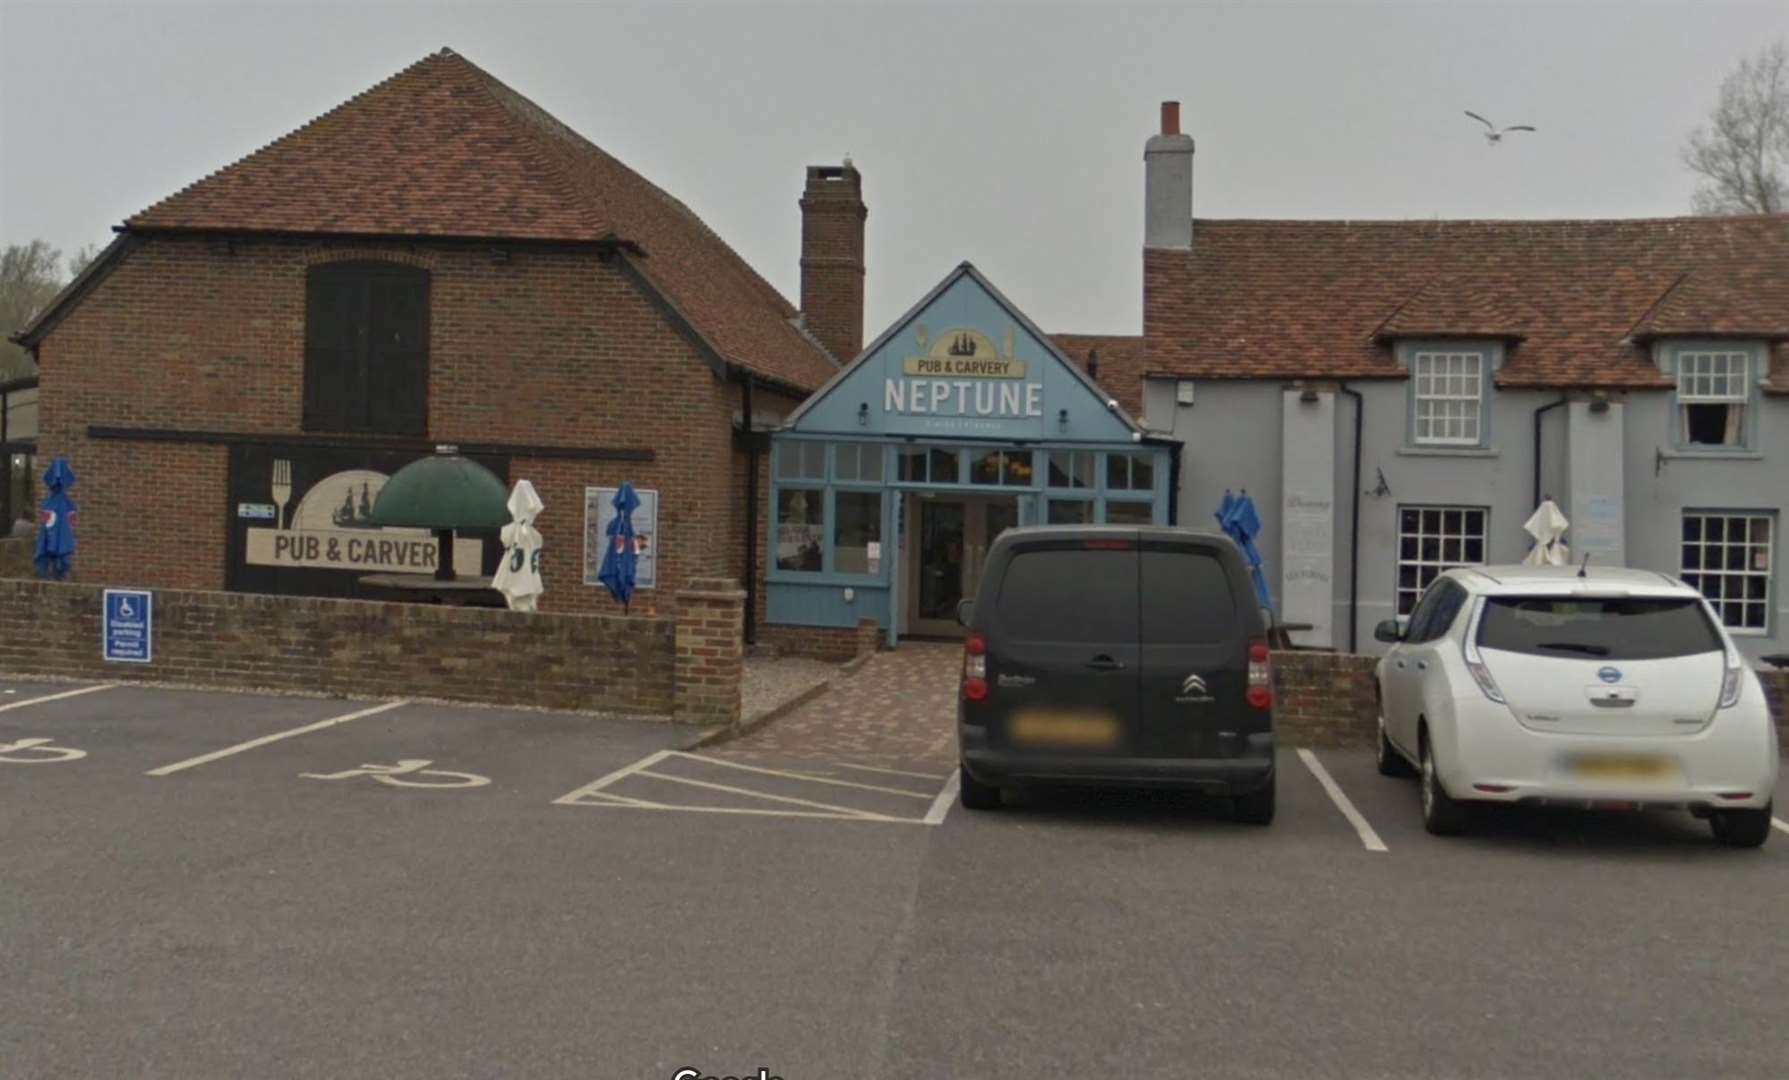 The attack happened in the car park of the Neptune Pub & Carvery in Dymchurch. Photo: Google Street view